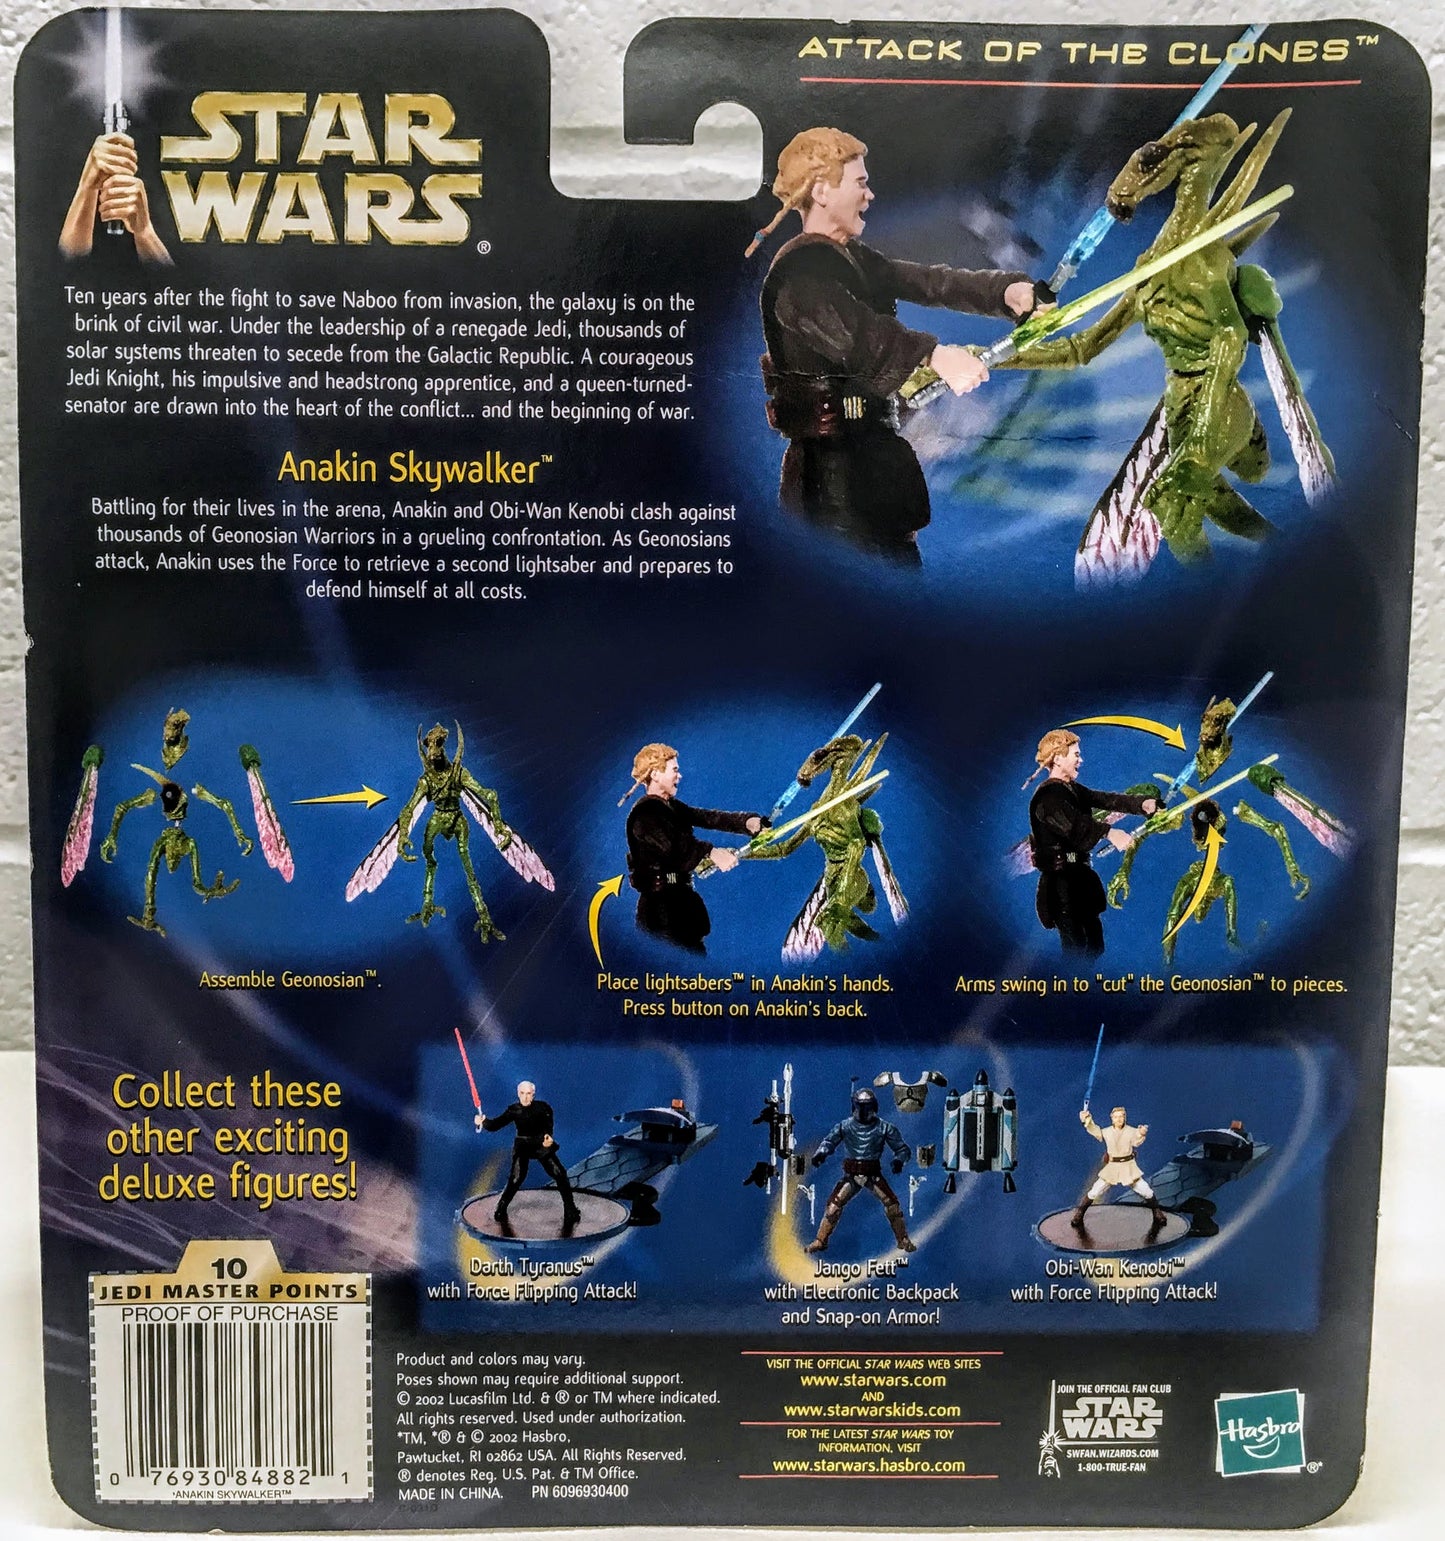 Attack of the Clones: Anakin Skywalker with Lightsaber Slashing Action